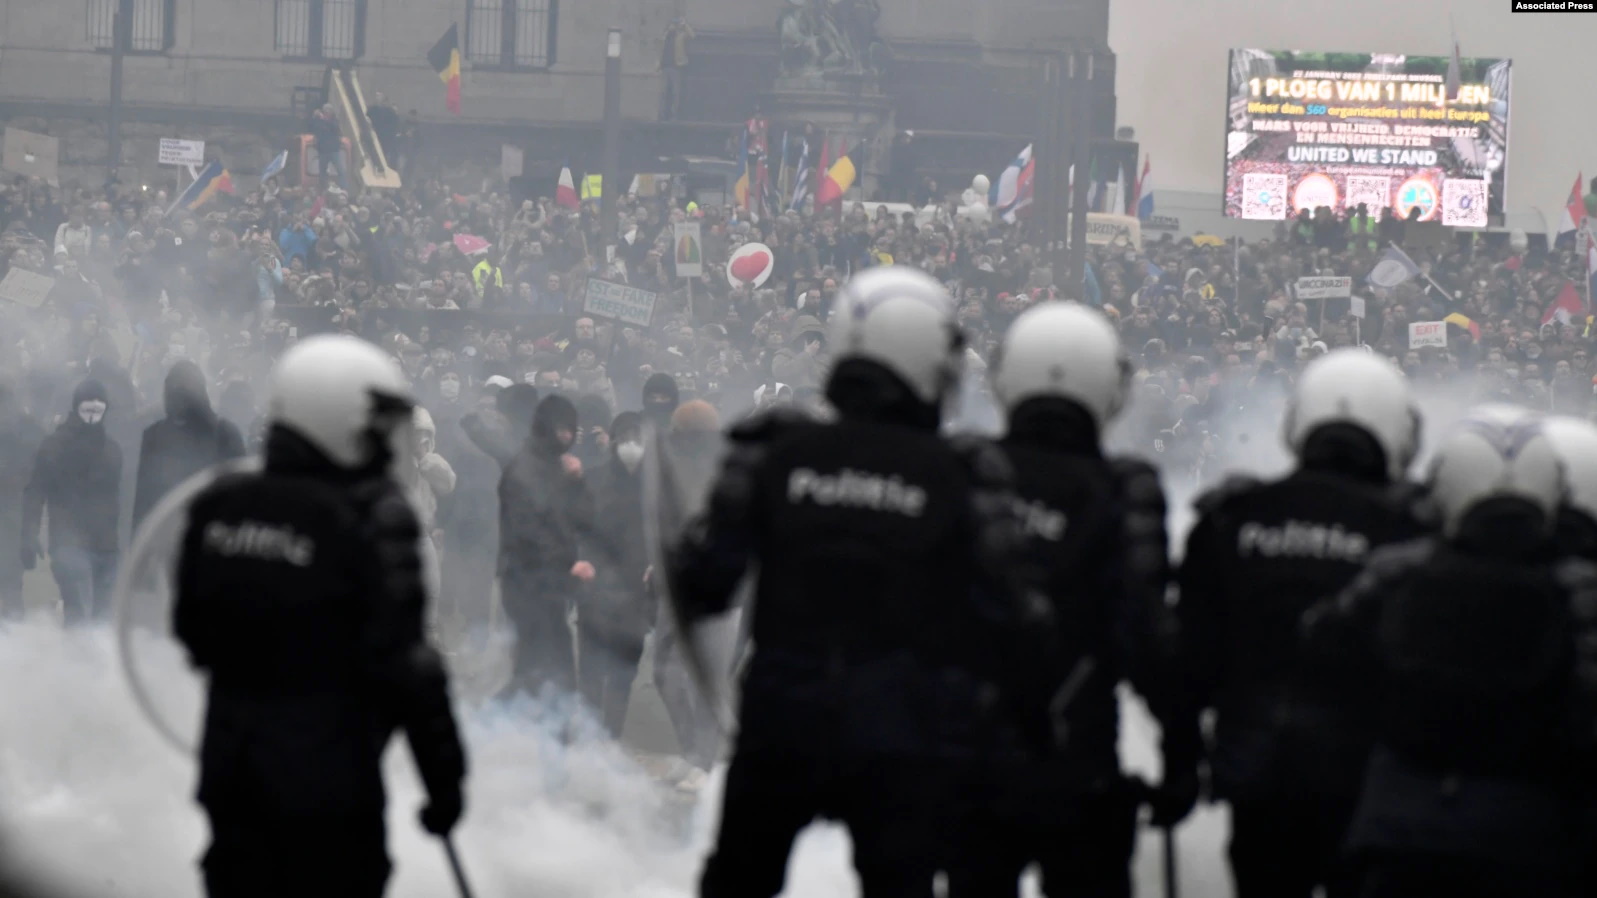 Police use water cannons against anti-vaccination protesters during a demonstration against COVID-19 measures in Brussels, Belgium, 23 January 2022. Photo: AP Photo